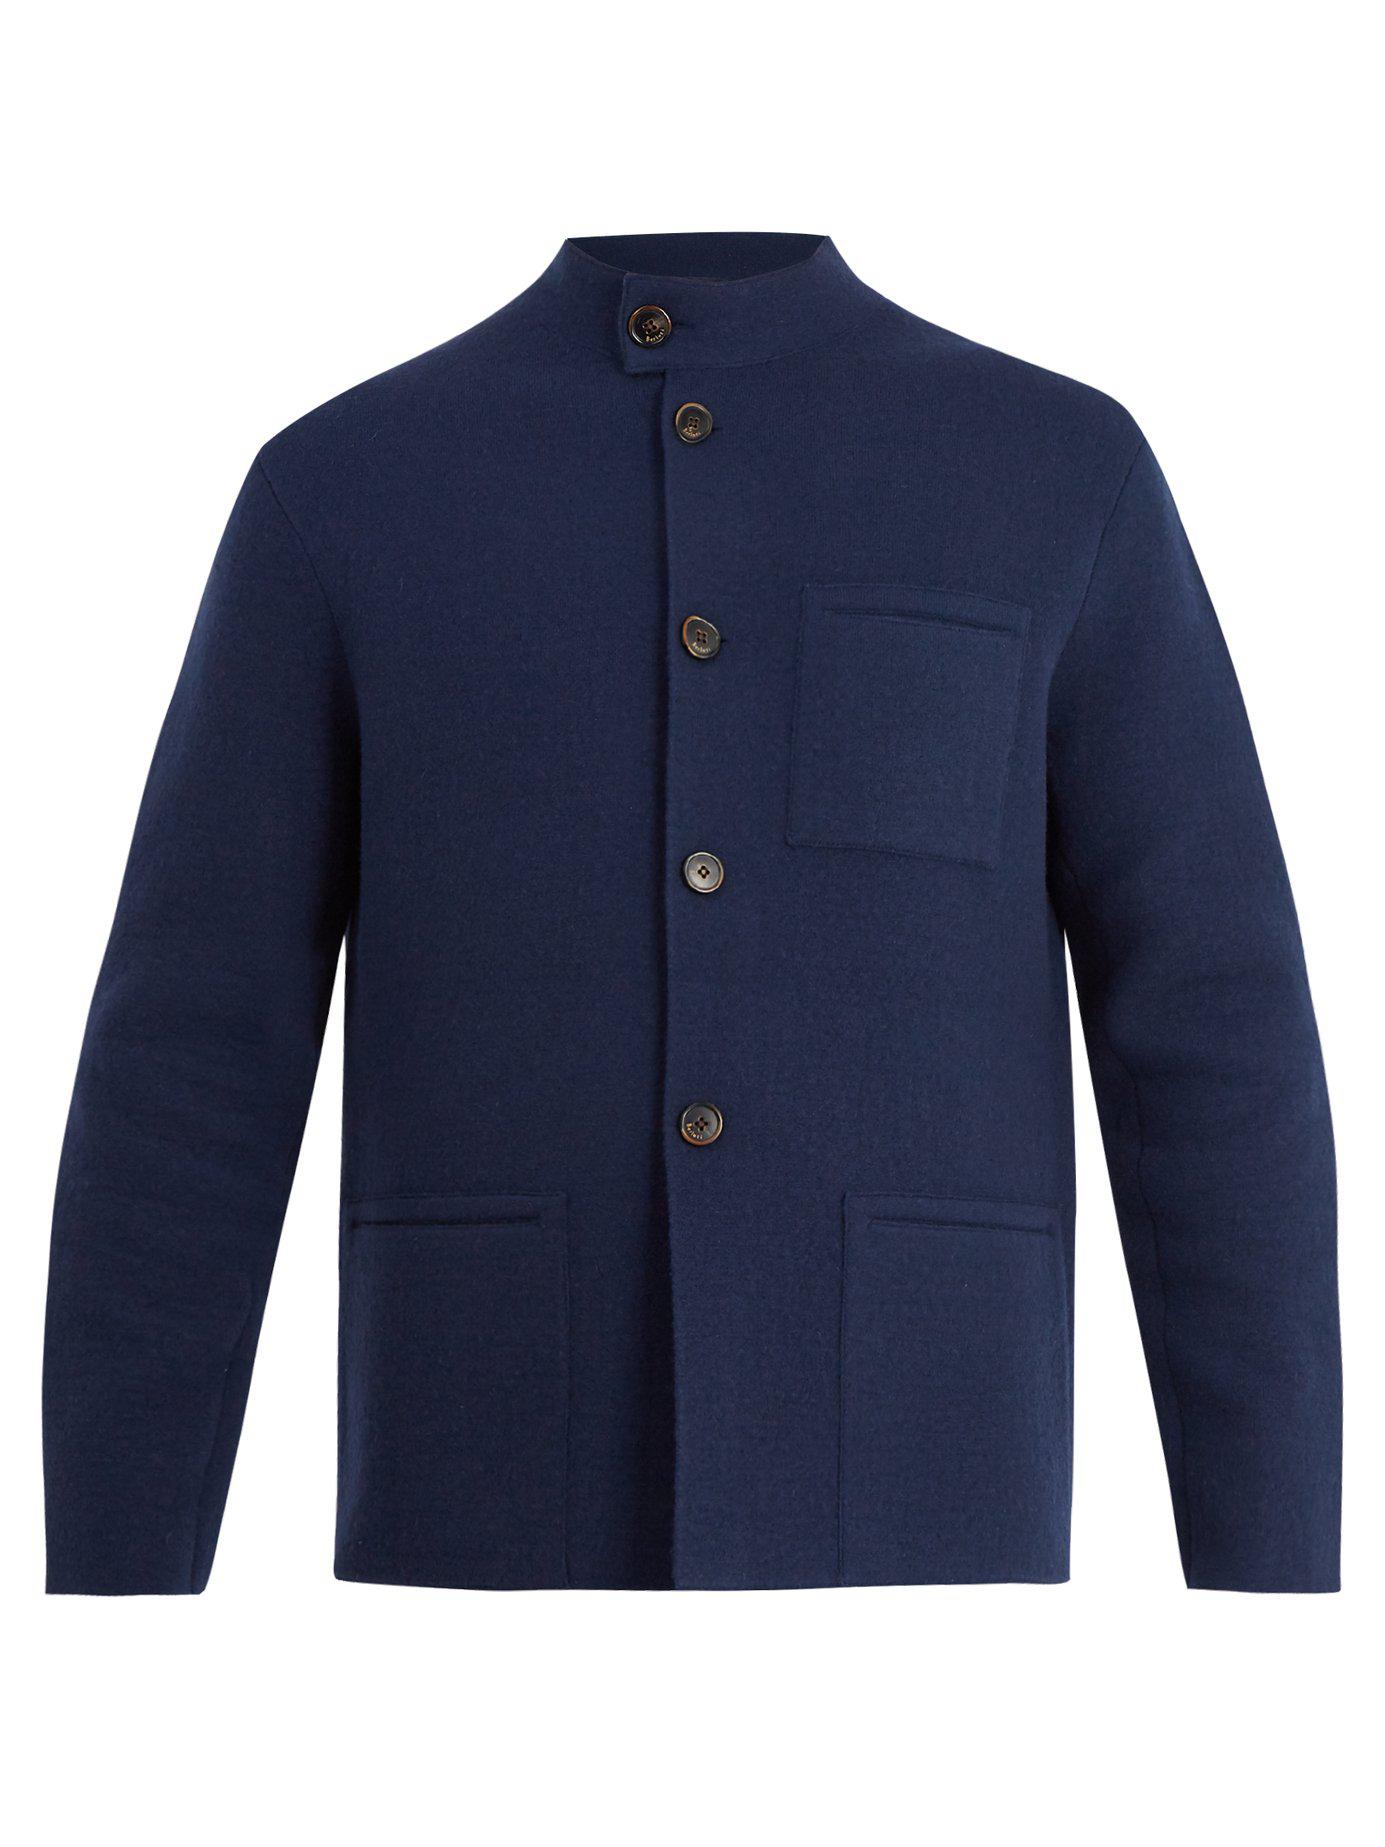 Berluti Forestiere Wool And Cashmere Blend Jacket in Blue for Men | Lyst